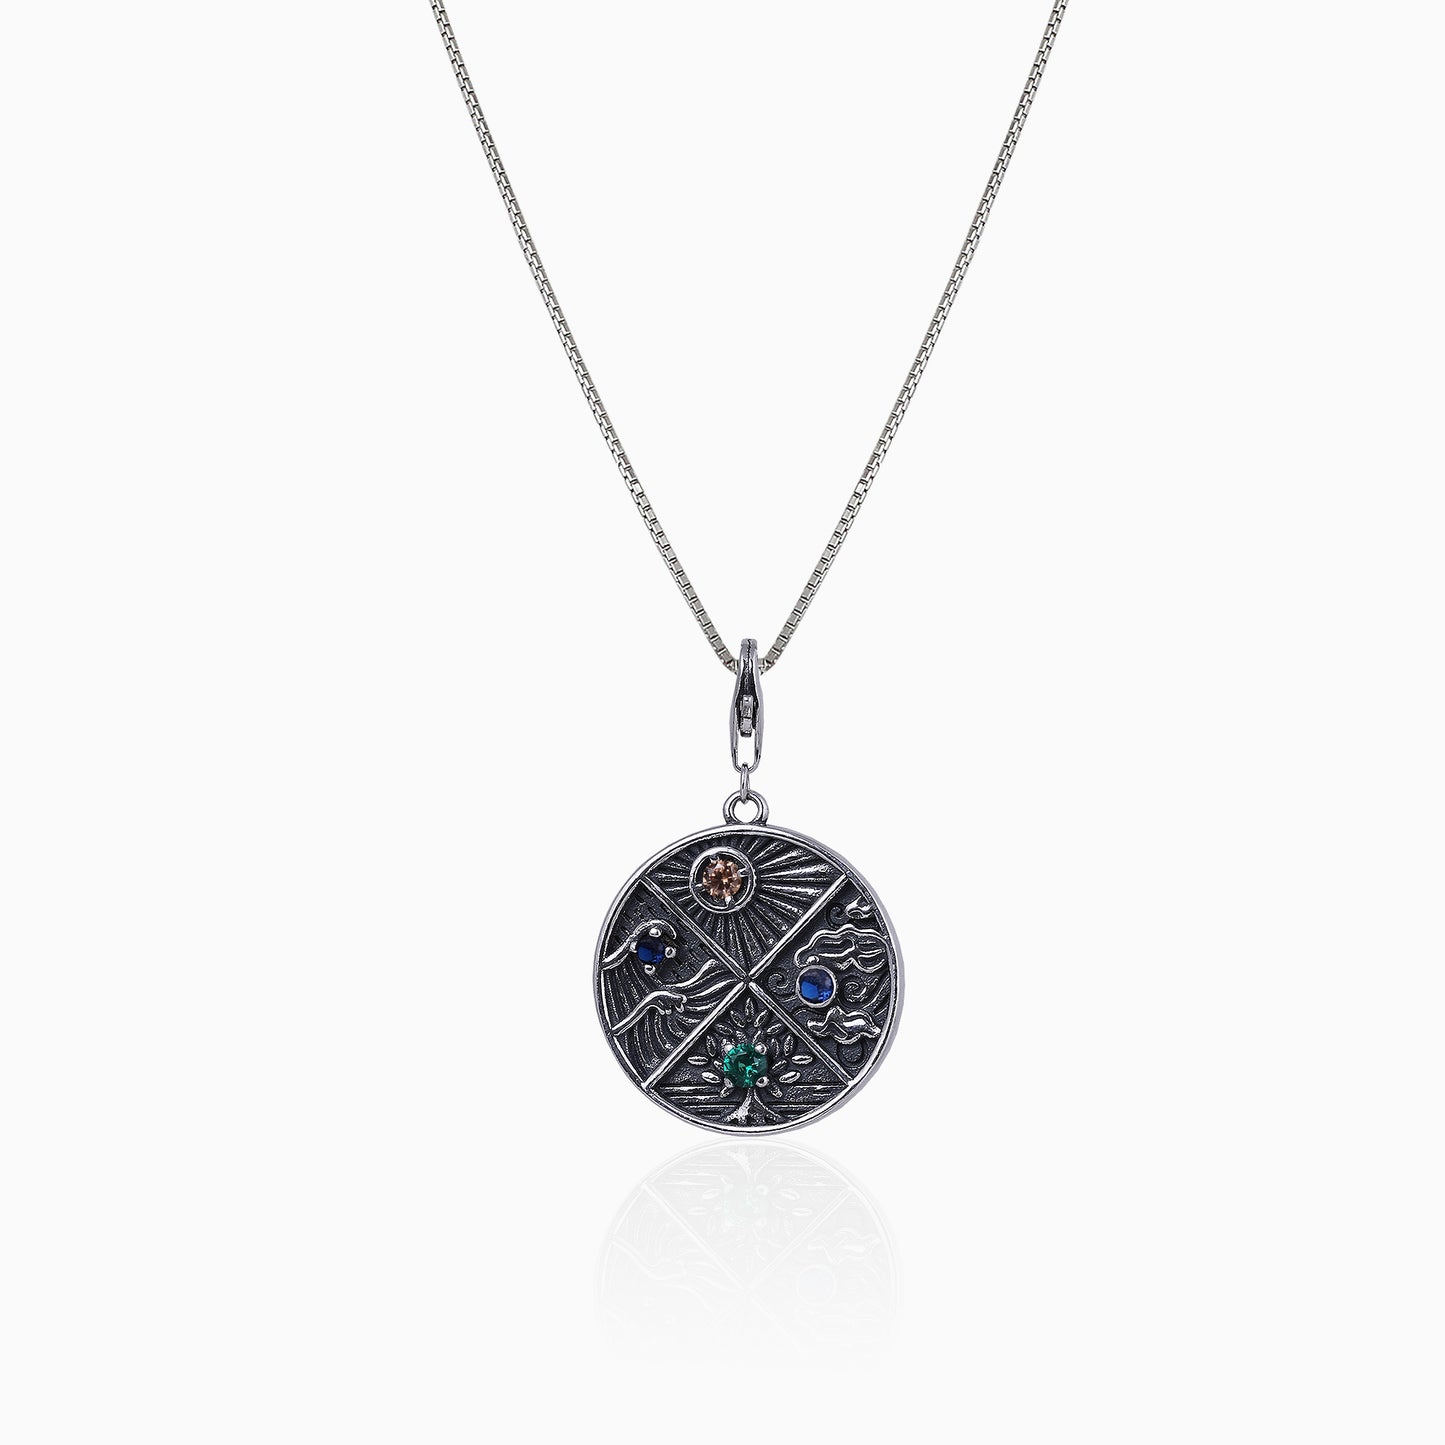 Oxidised Silver Elements Pendant With Box Chain